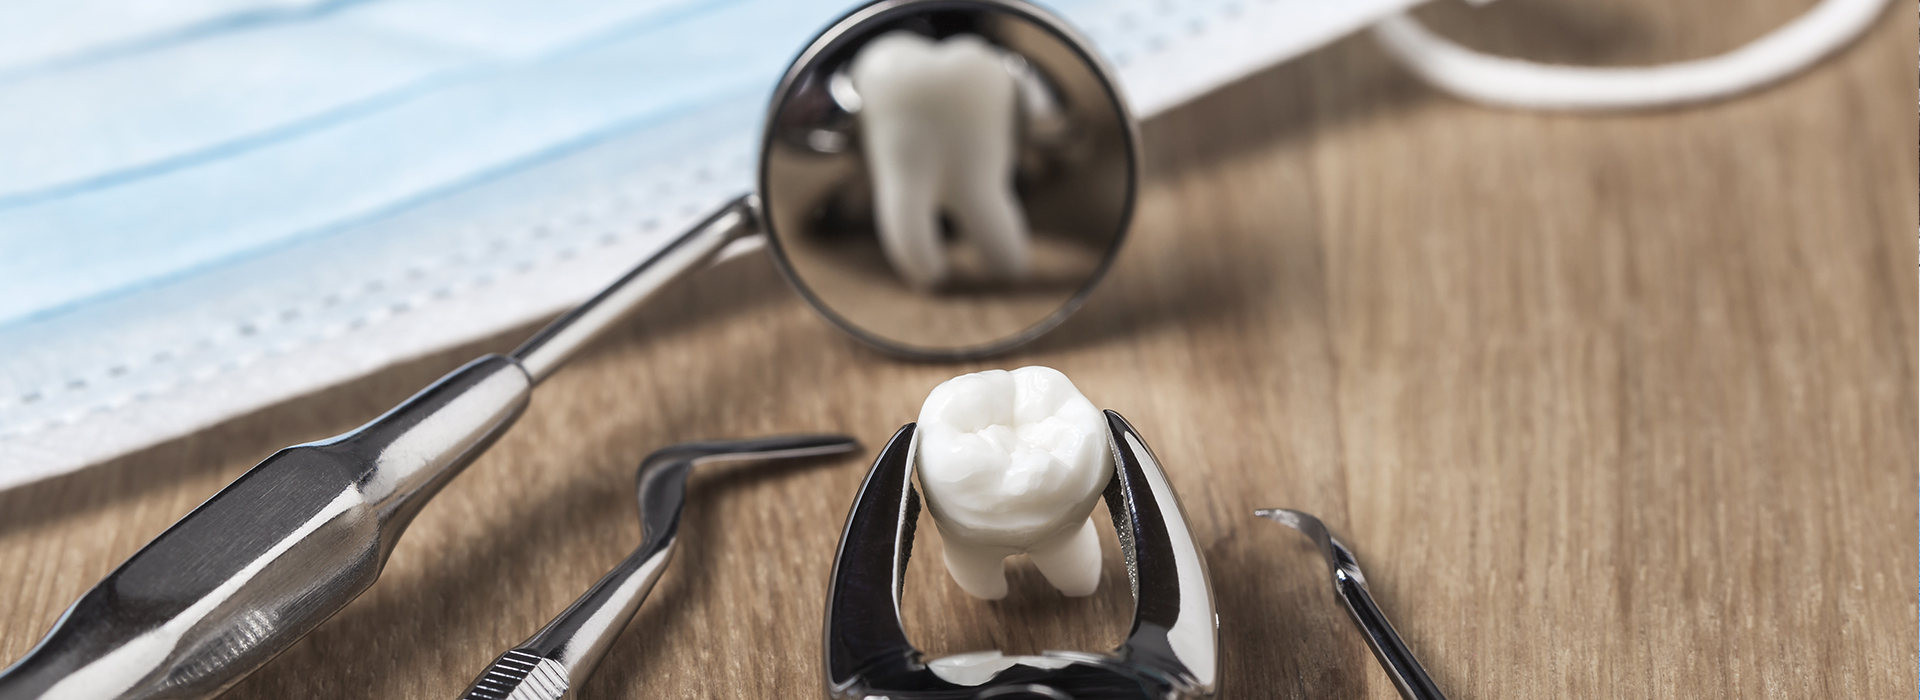 Mann Dental Care | Temporary Braces, Dental Cleanings and Root Canals